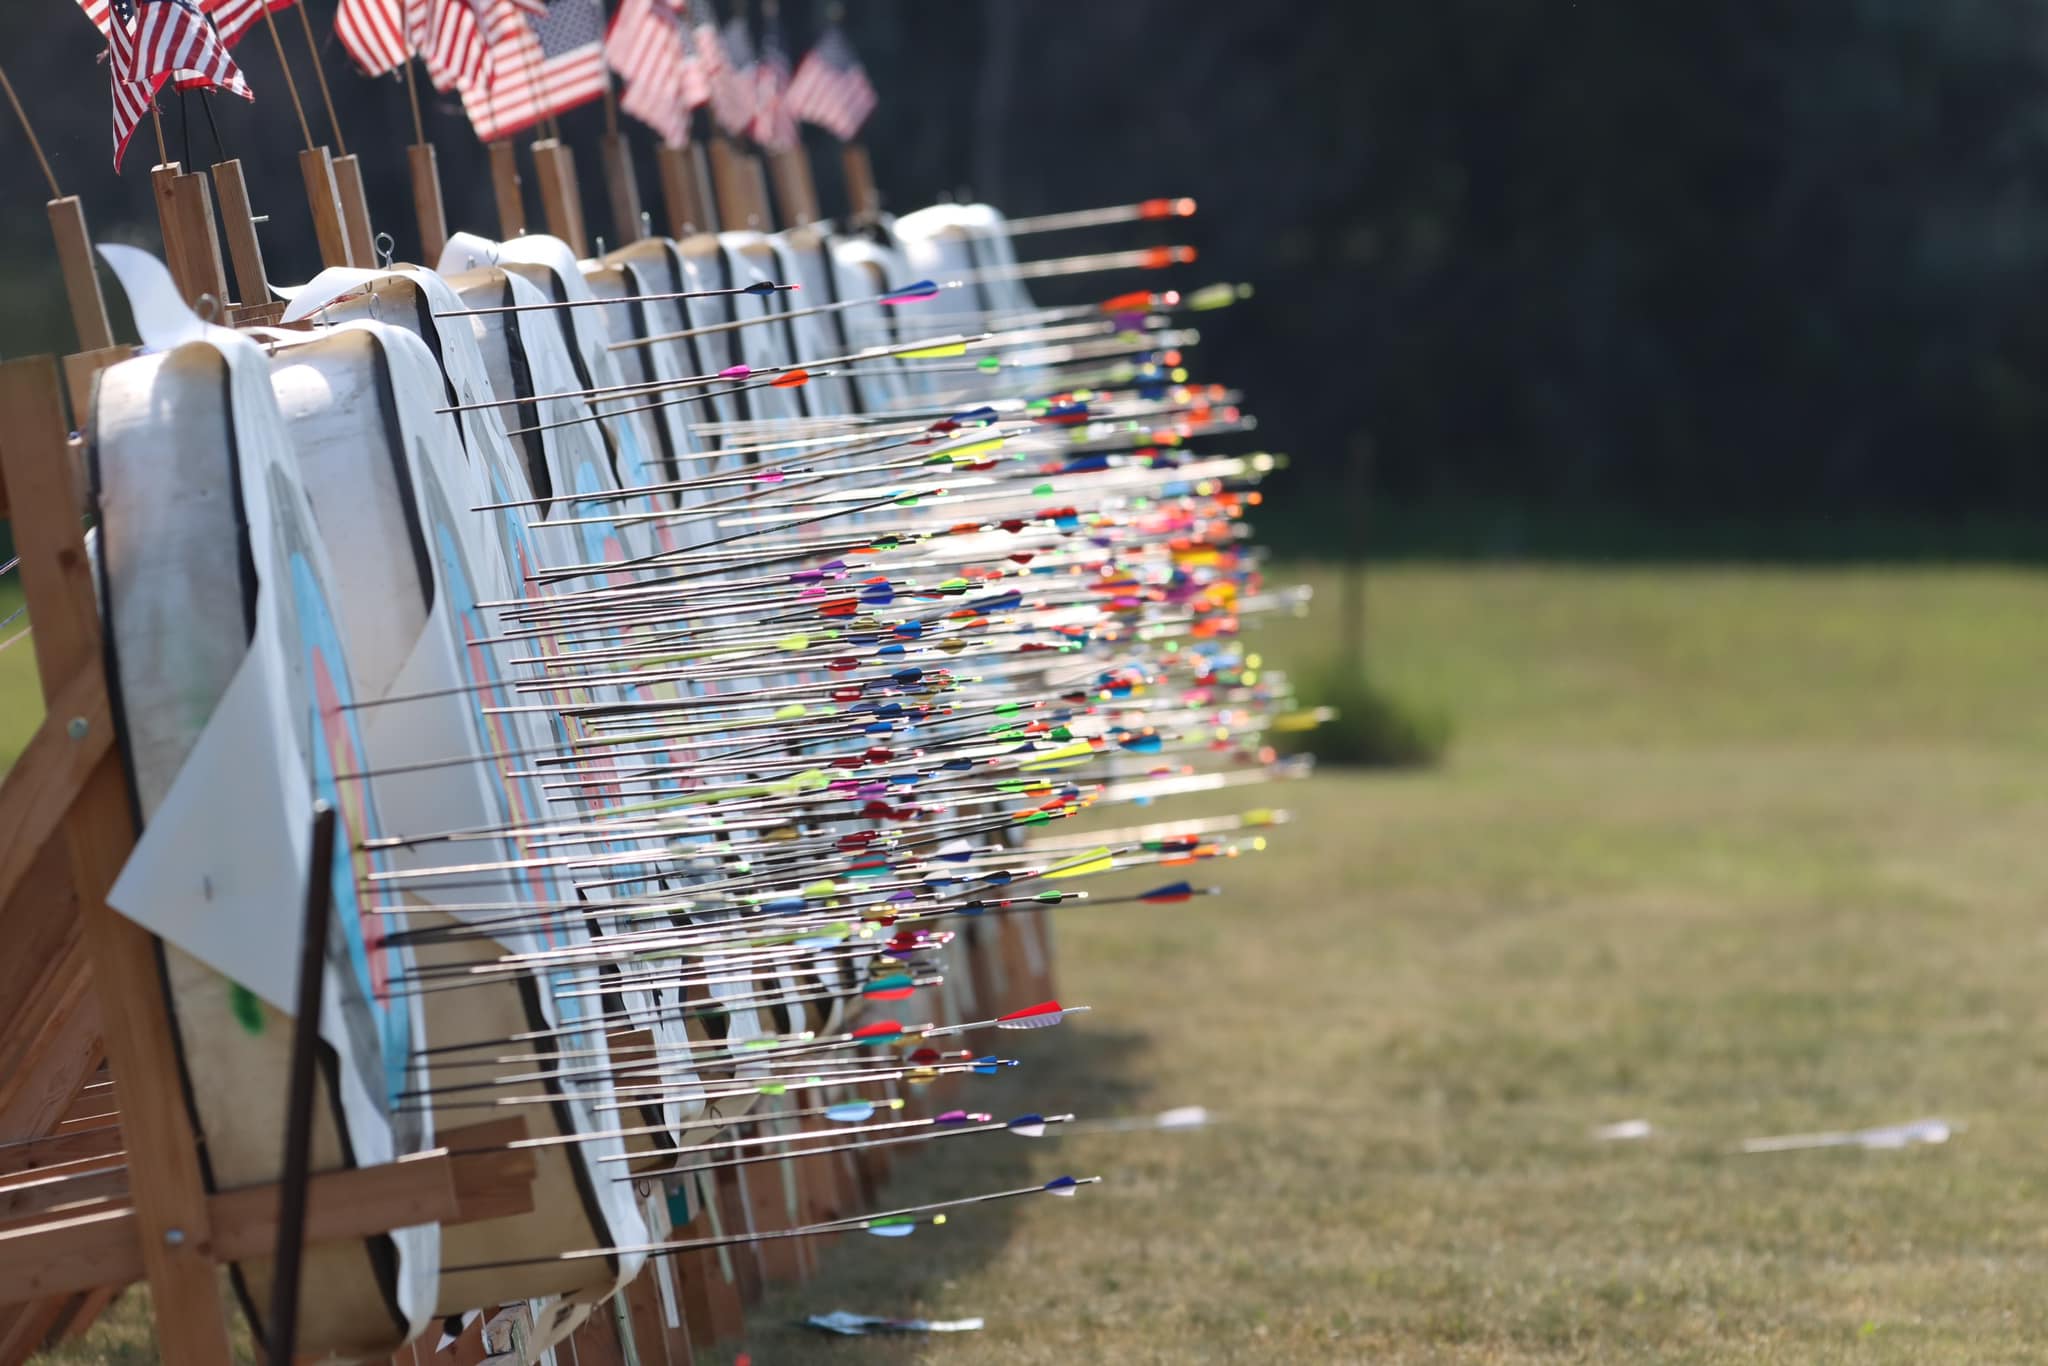 A row of targets is full of arrows in an outdoor field